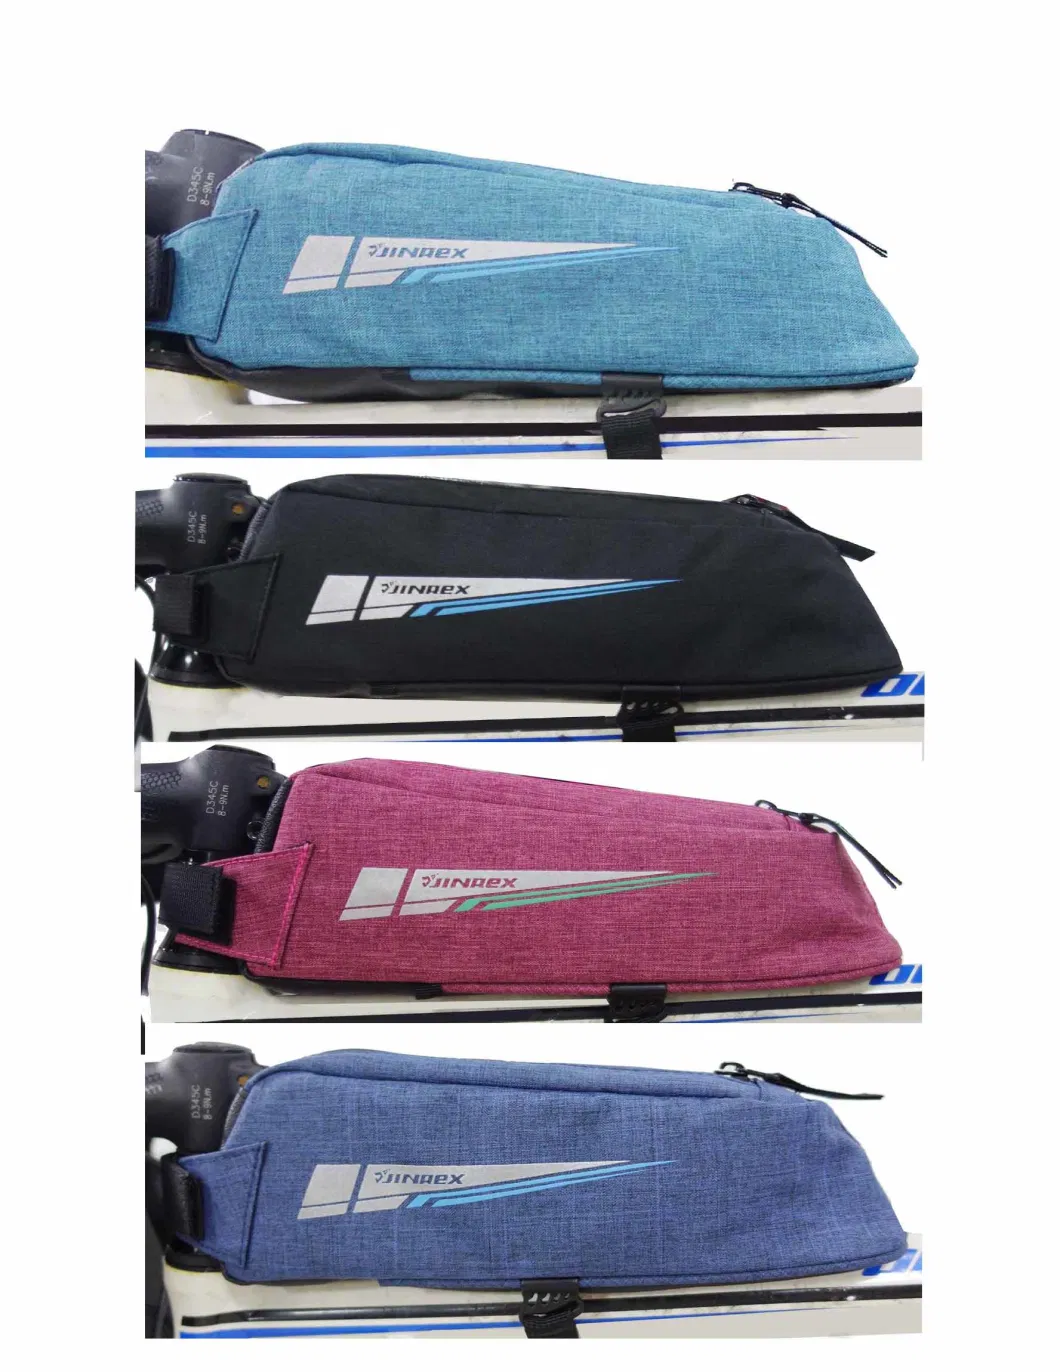 Sports Outdoor Cycling Bike Bag Bicycle Accessory Saddle Frame Bag Exercise Equipment